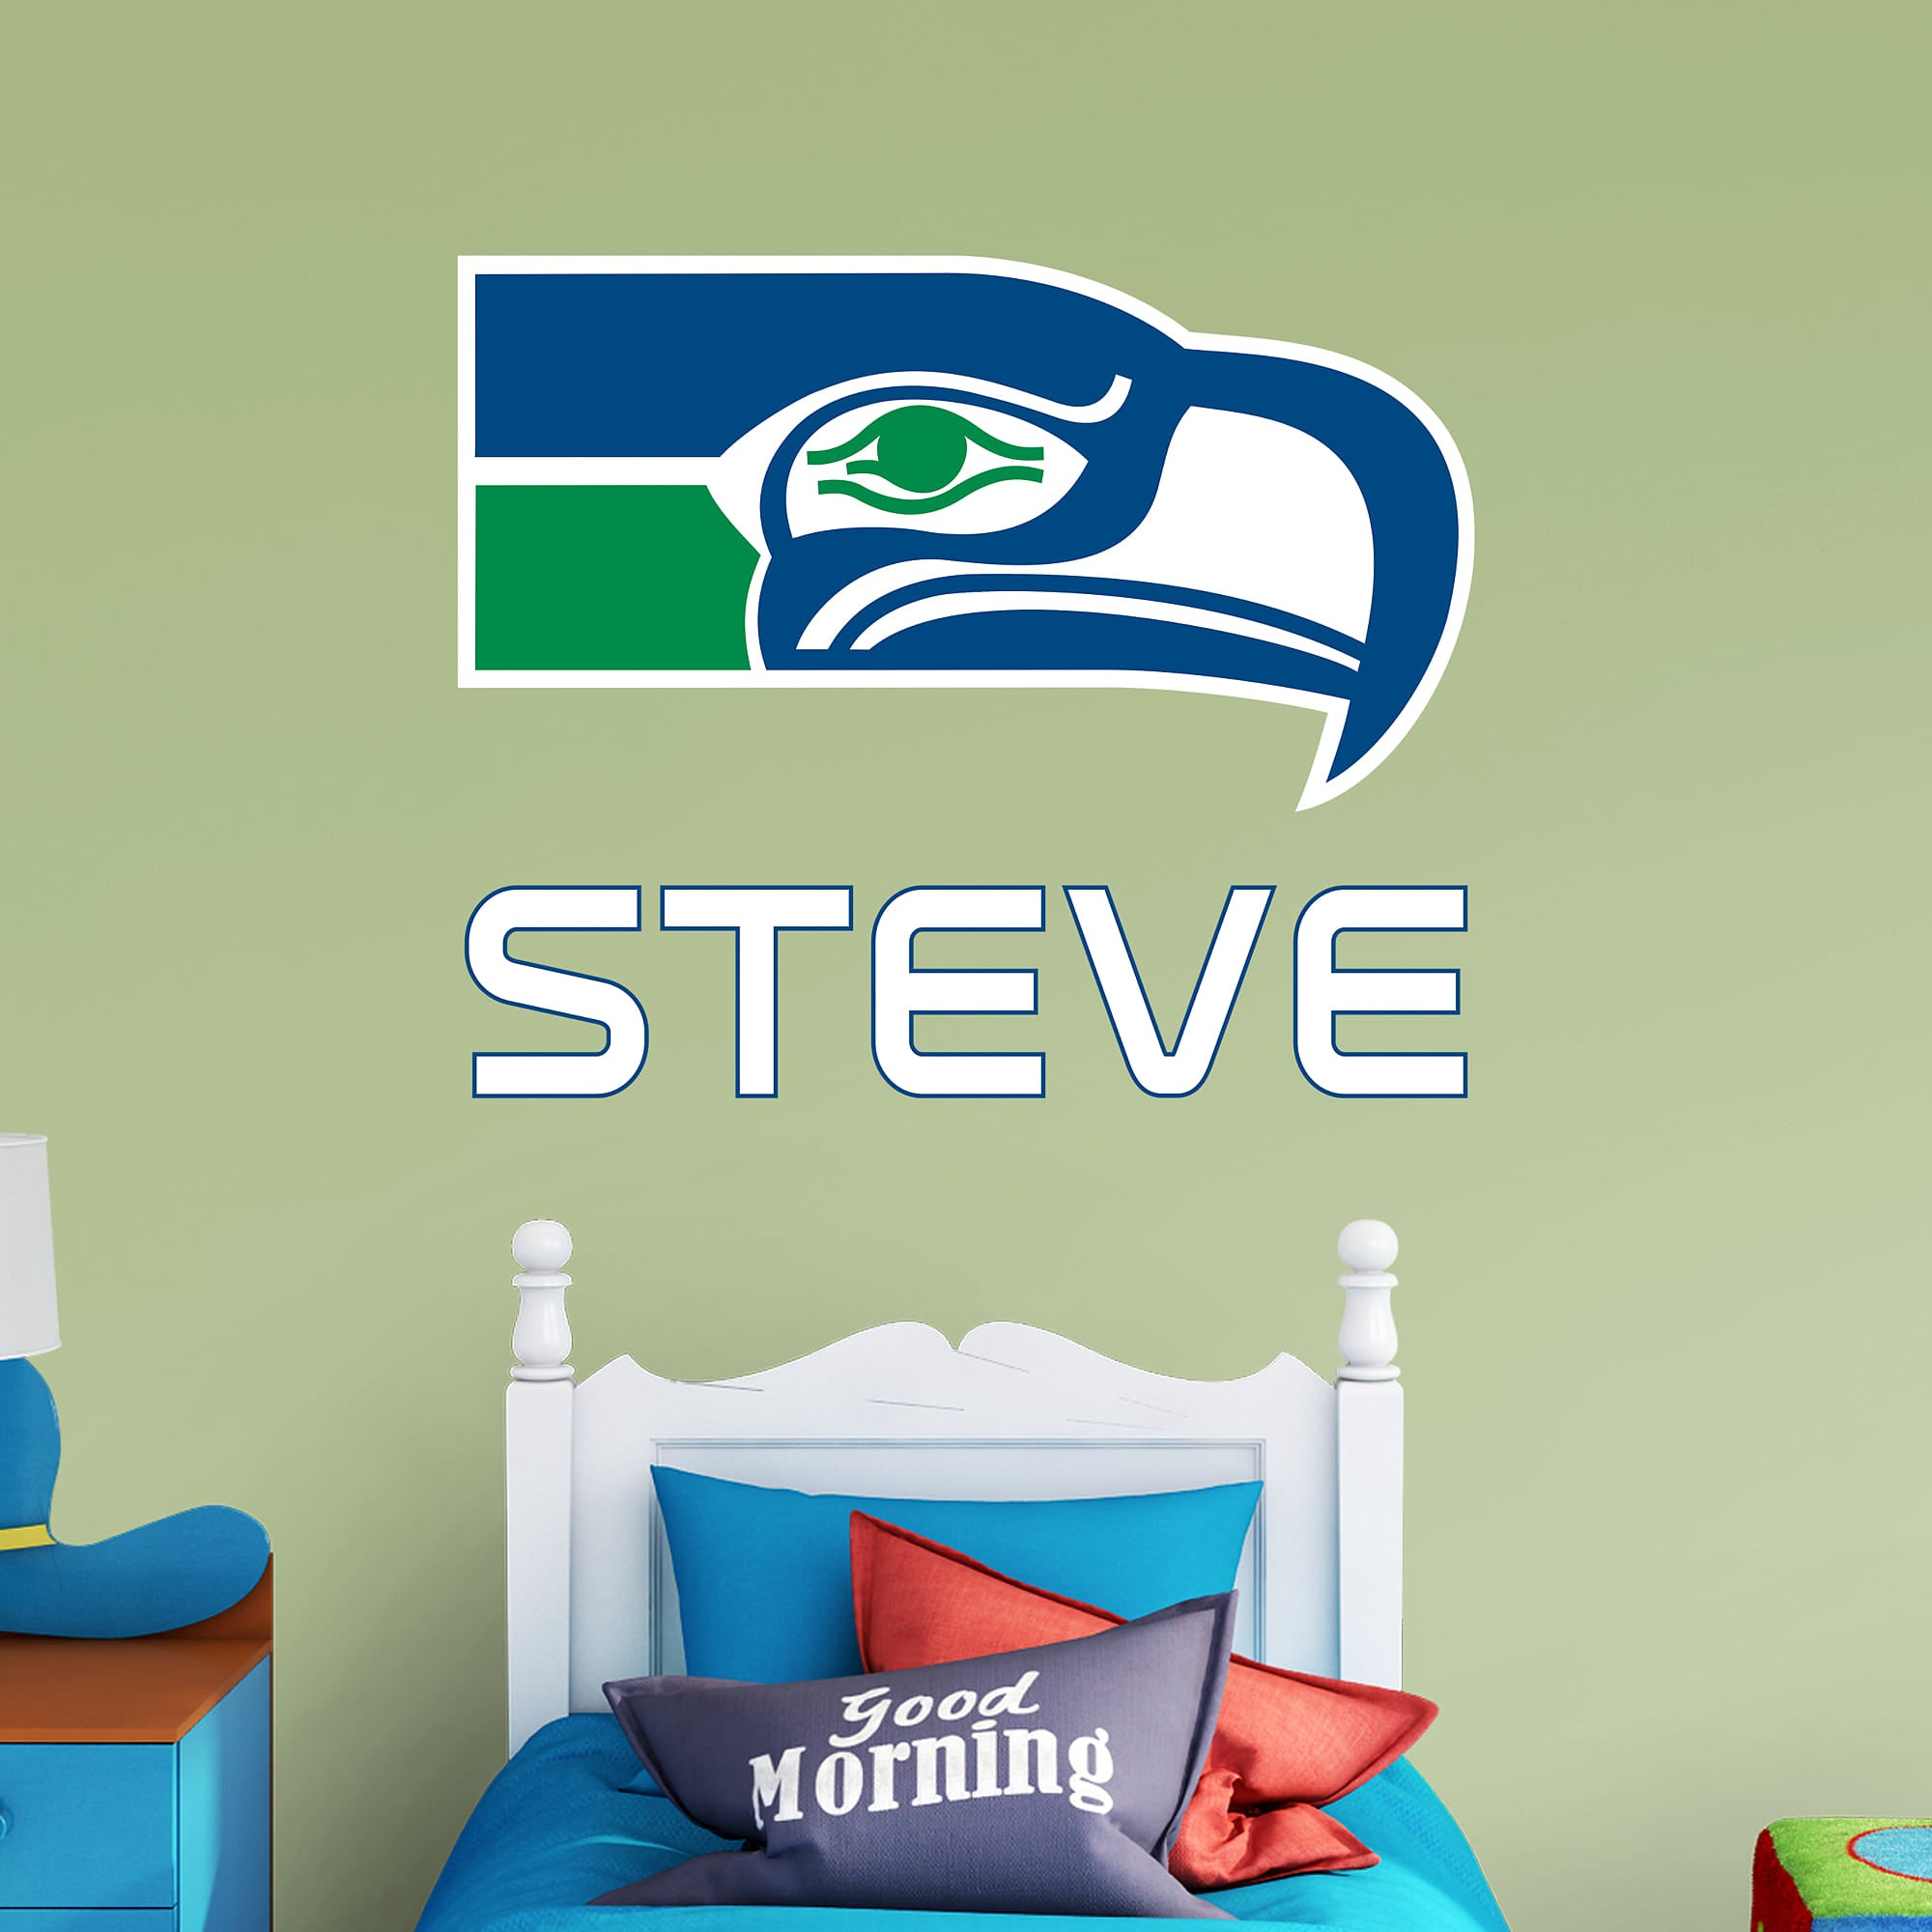 Seattle Seahawks: Classic Stacked Personalized Name - Officially Licensed NFL Transfer Decal in White (52"W x 39.5"H) by Fathead